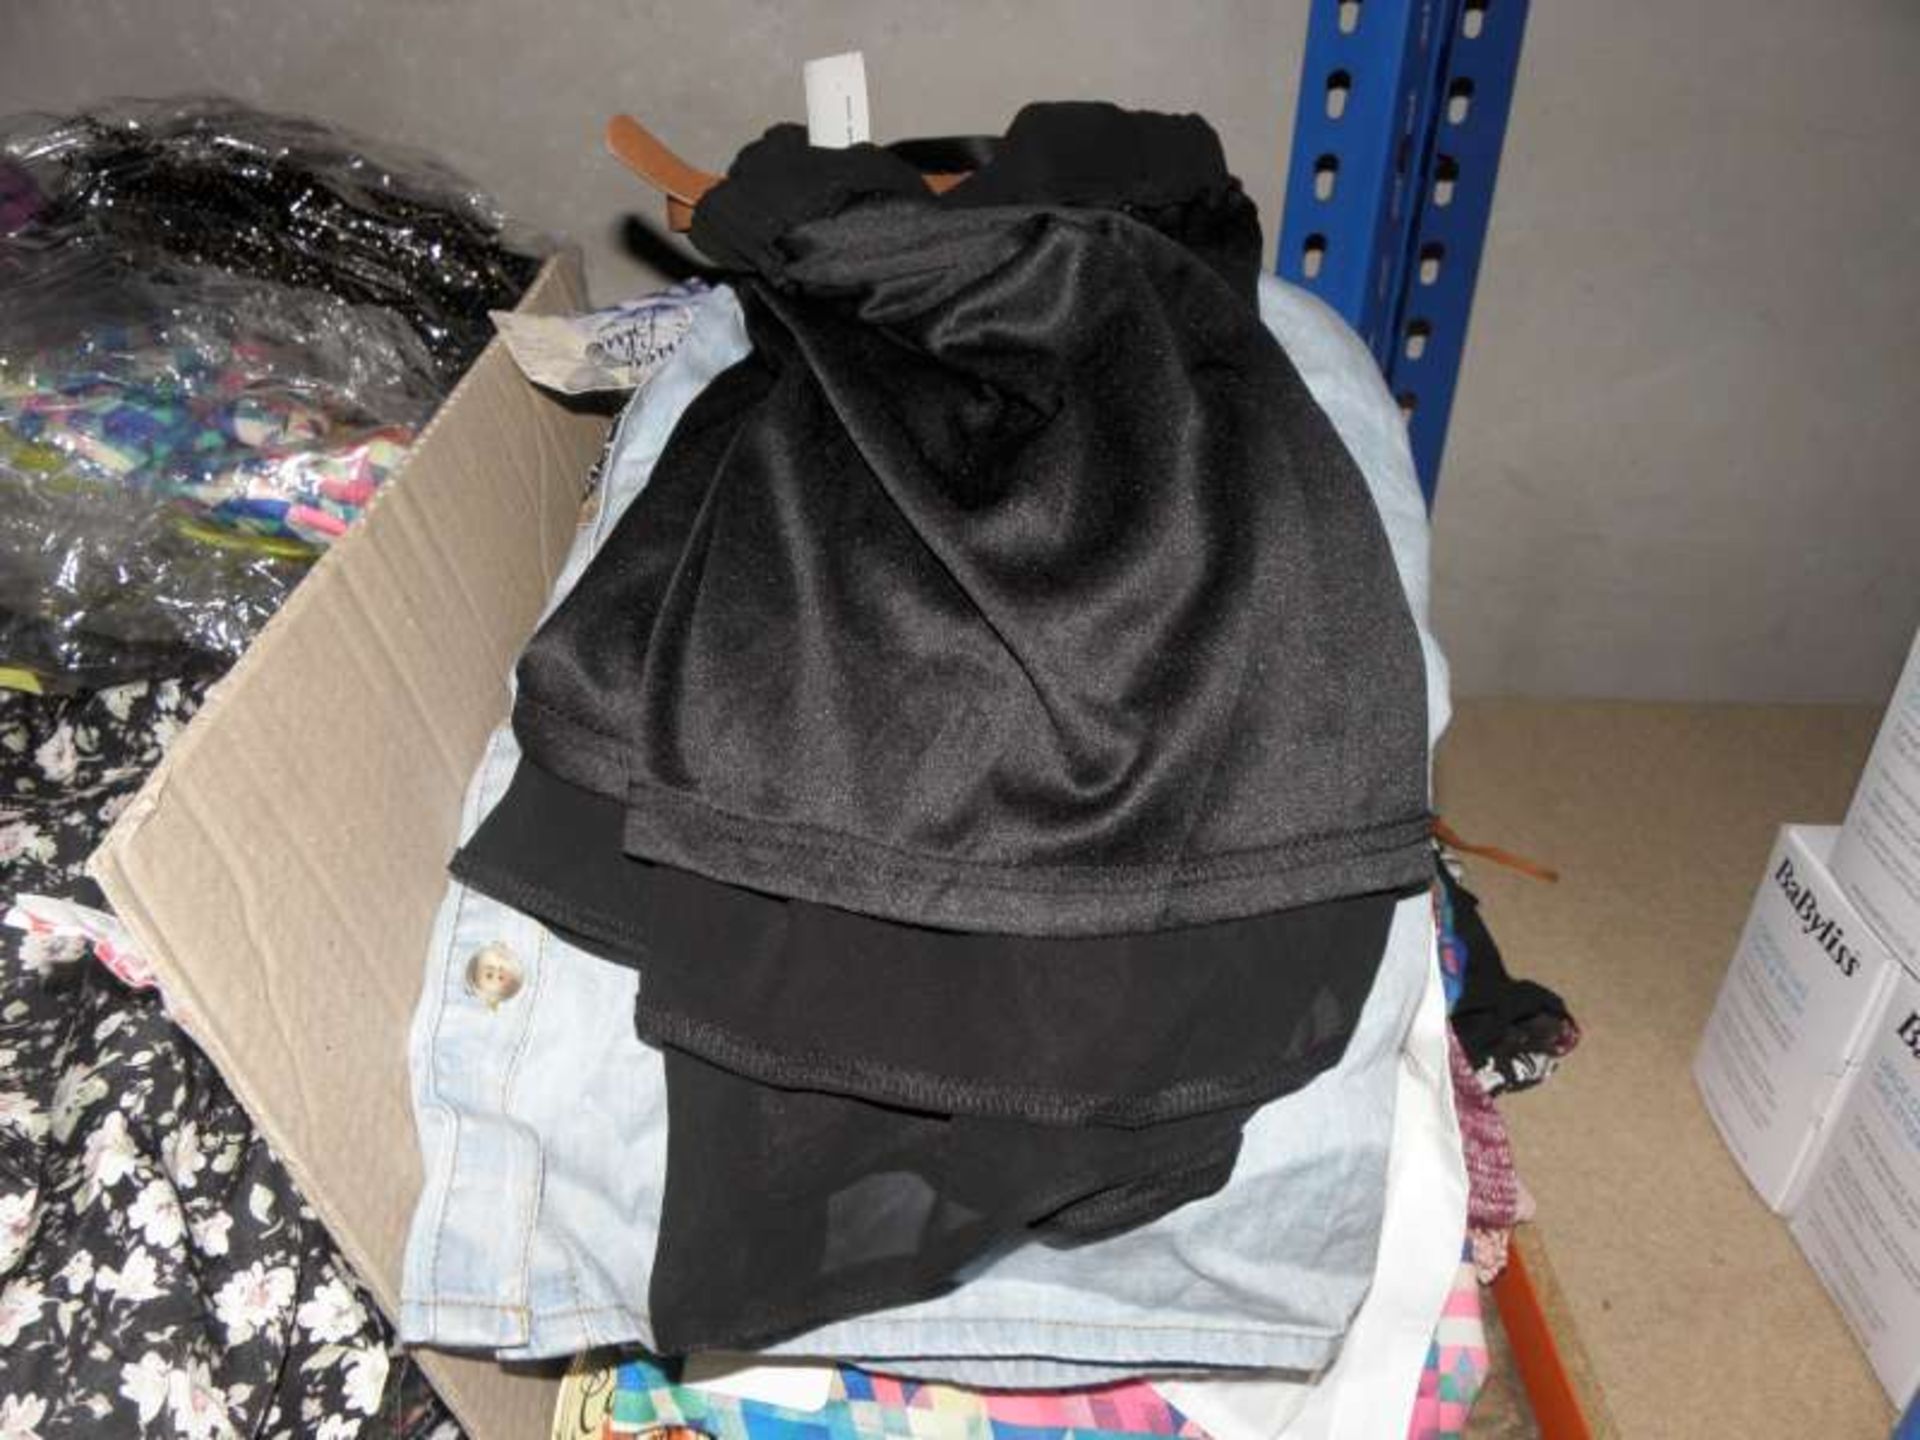 APPROXIMATELY 30 ITEMS OF LADIES CLOTHING IN VARIOUS COLOURS AND SIZES